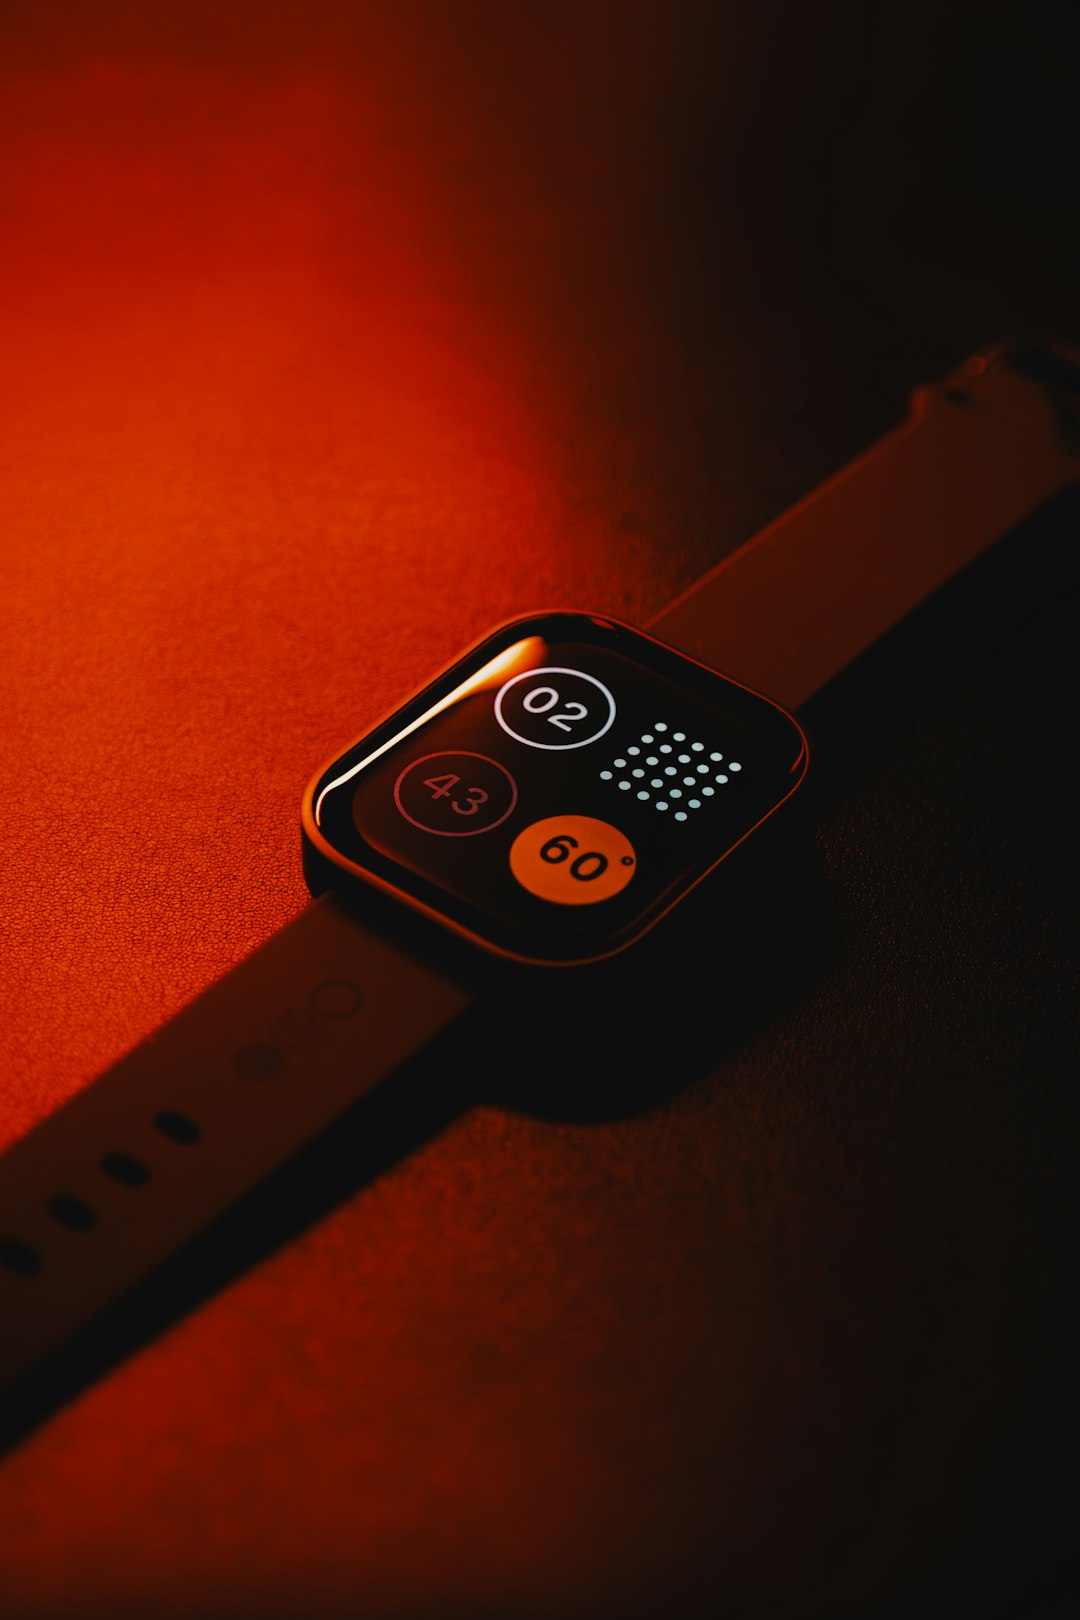 Photo of a CMF Watch Pro smartwatch by Nothing. Took this to challenge myself and also to prove that I could still take product photography at night and make it look cool. Look was unintentionally influenced by Greig Fraser's cinematography of The Batman.